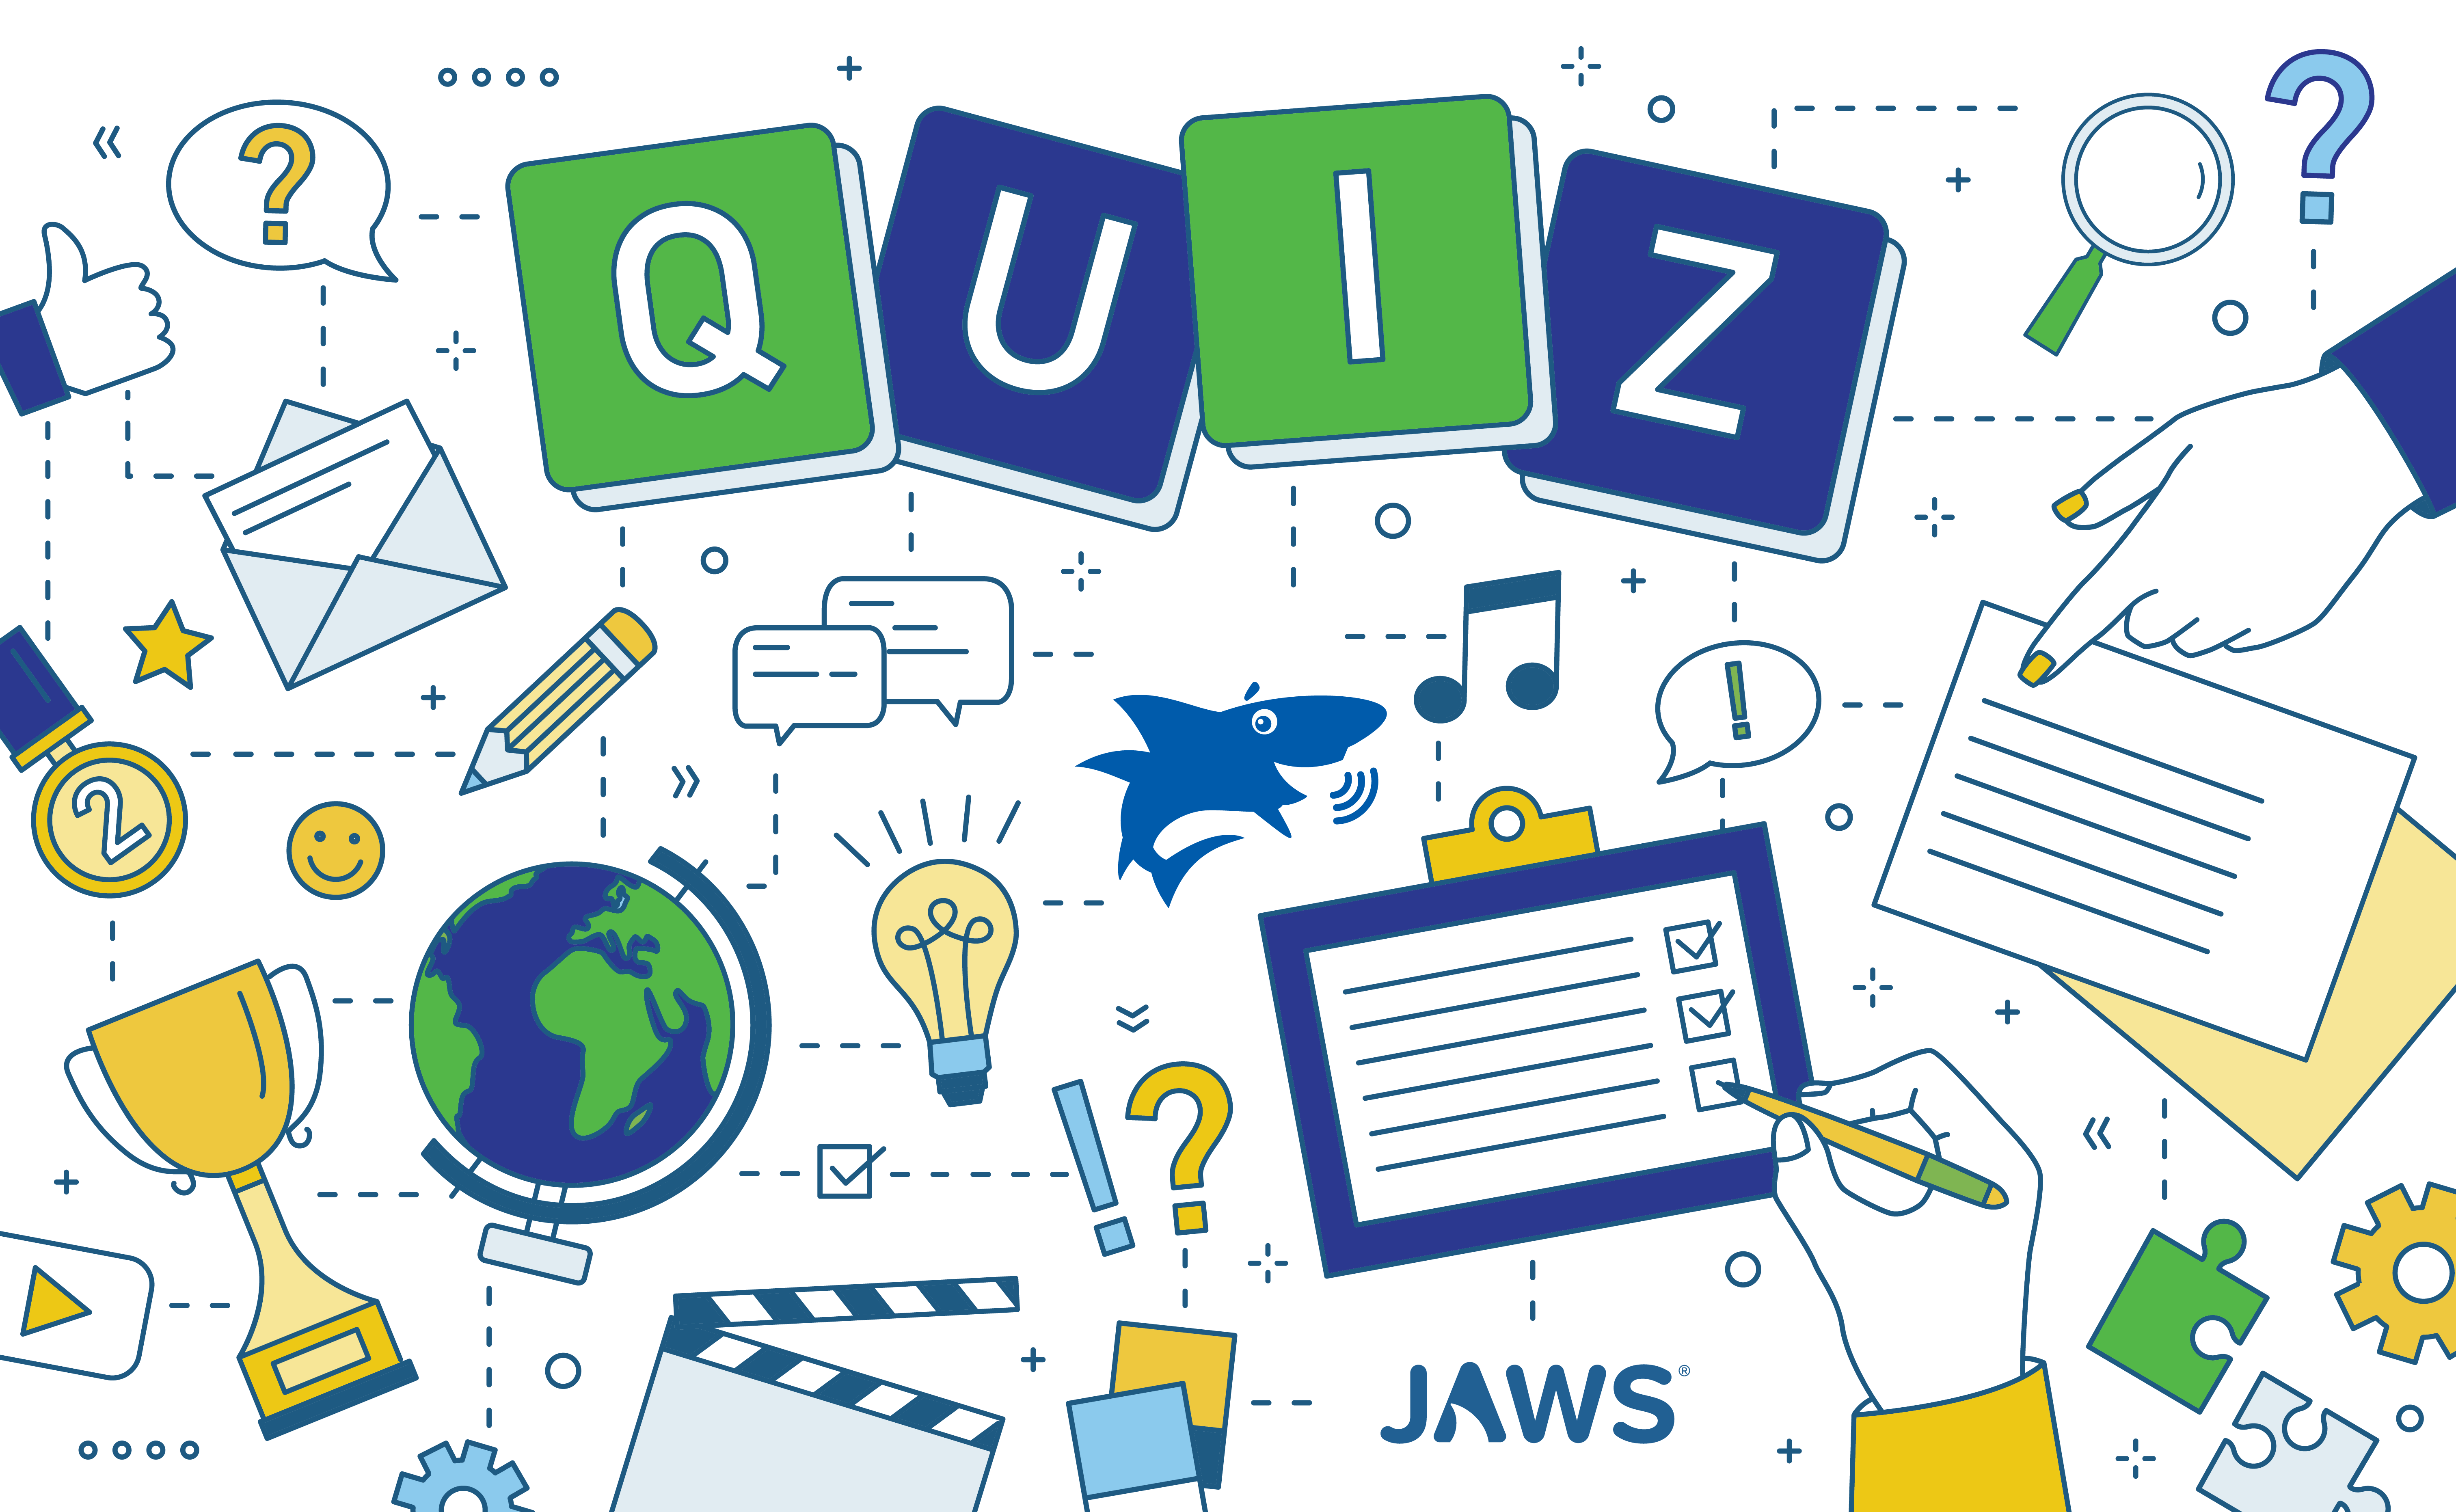 A collage of images with the text blocks 'quiz'  and graphics of gears and cogs, hands taking an exam, pencil, magnifying glass, play button, trophy, ribbons, puzzle pieces, etc.